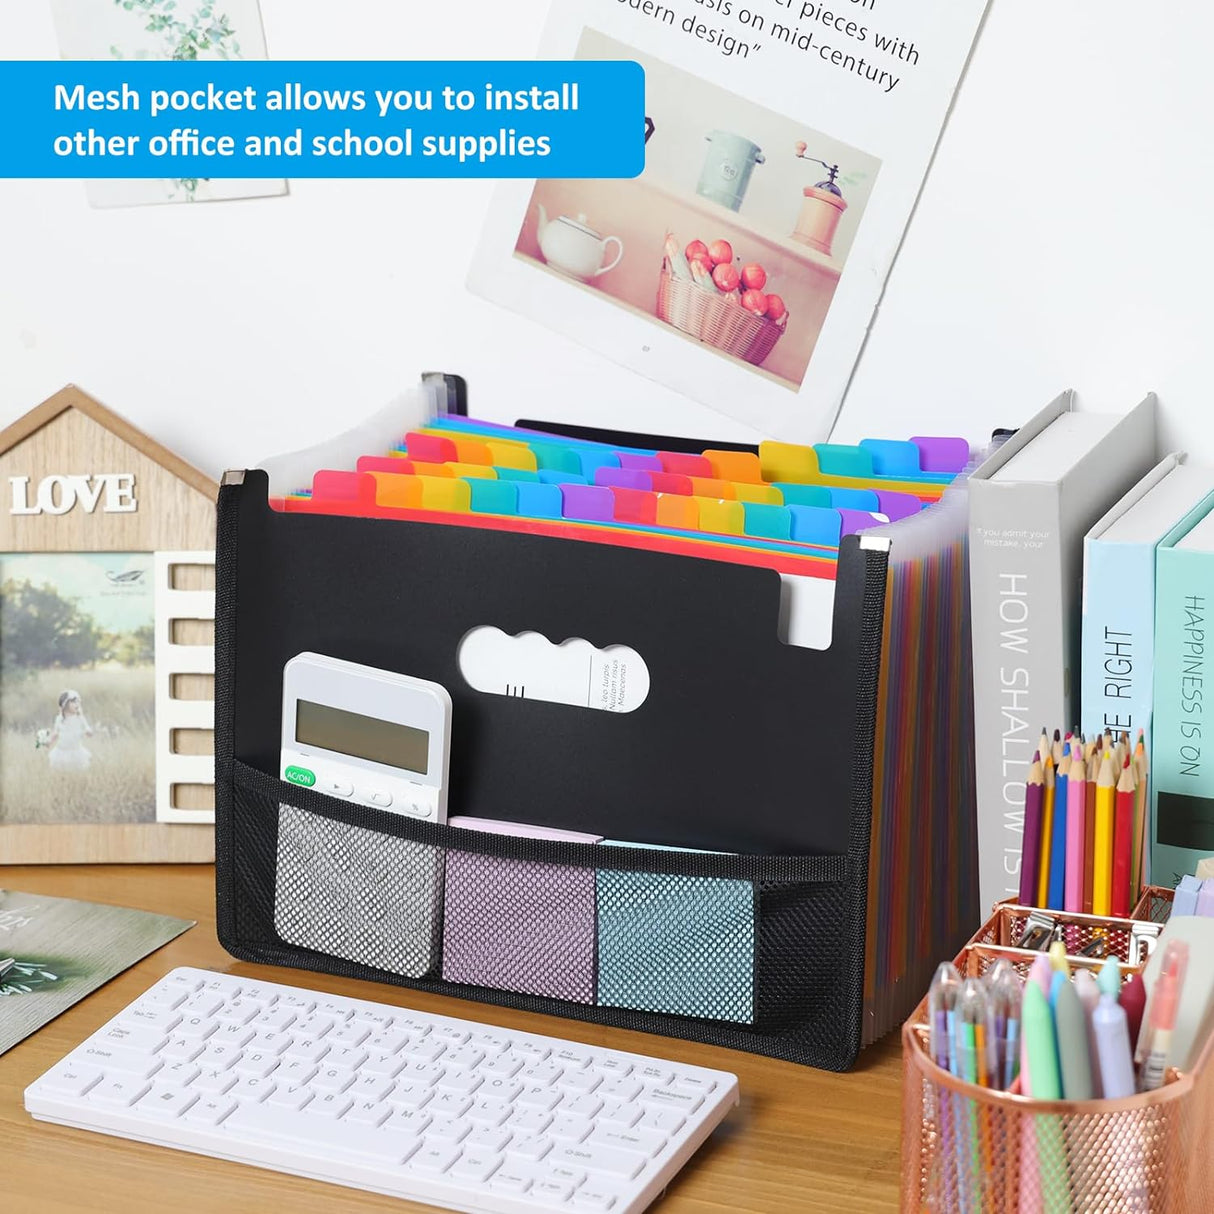 36 Pockets Expanding File Folder, Letter Size Accordion File Organizer with Cloth Edge Wrap Super Large Capacity for Storage Teachers Office and School Supplies